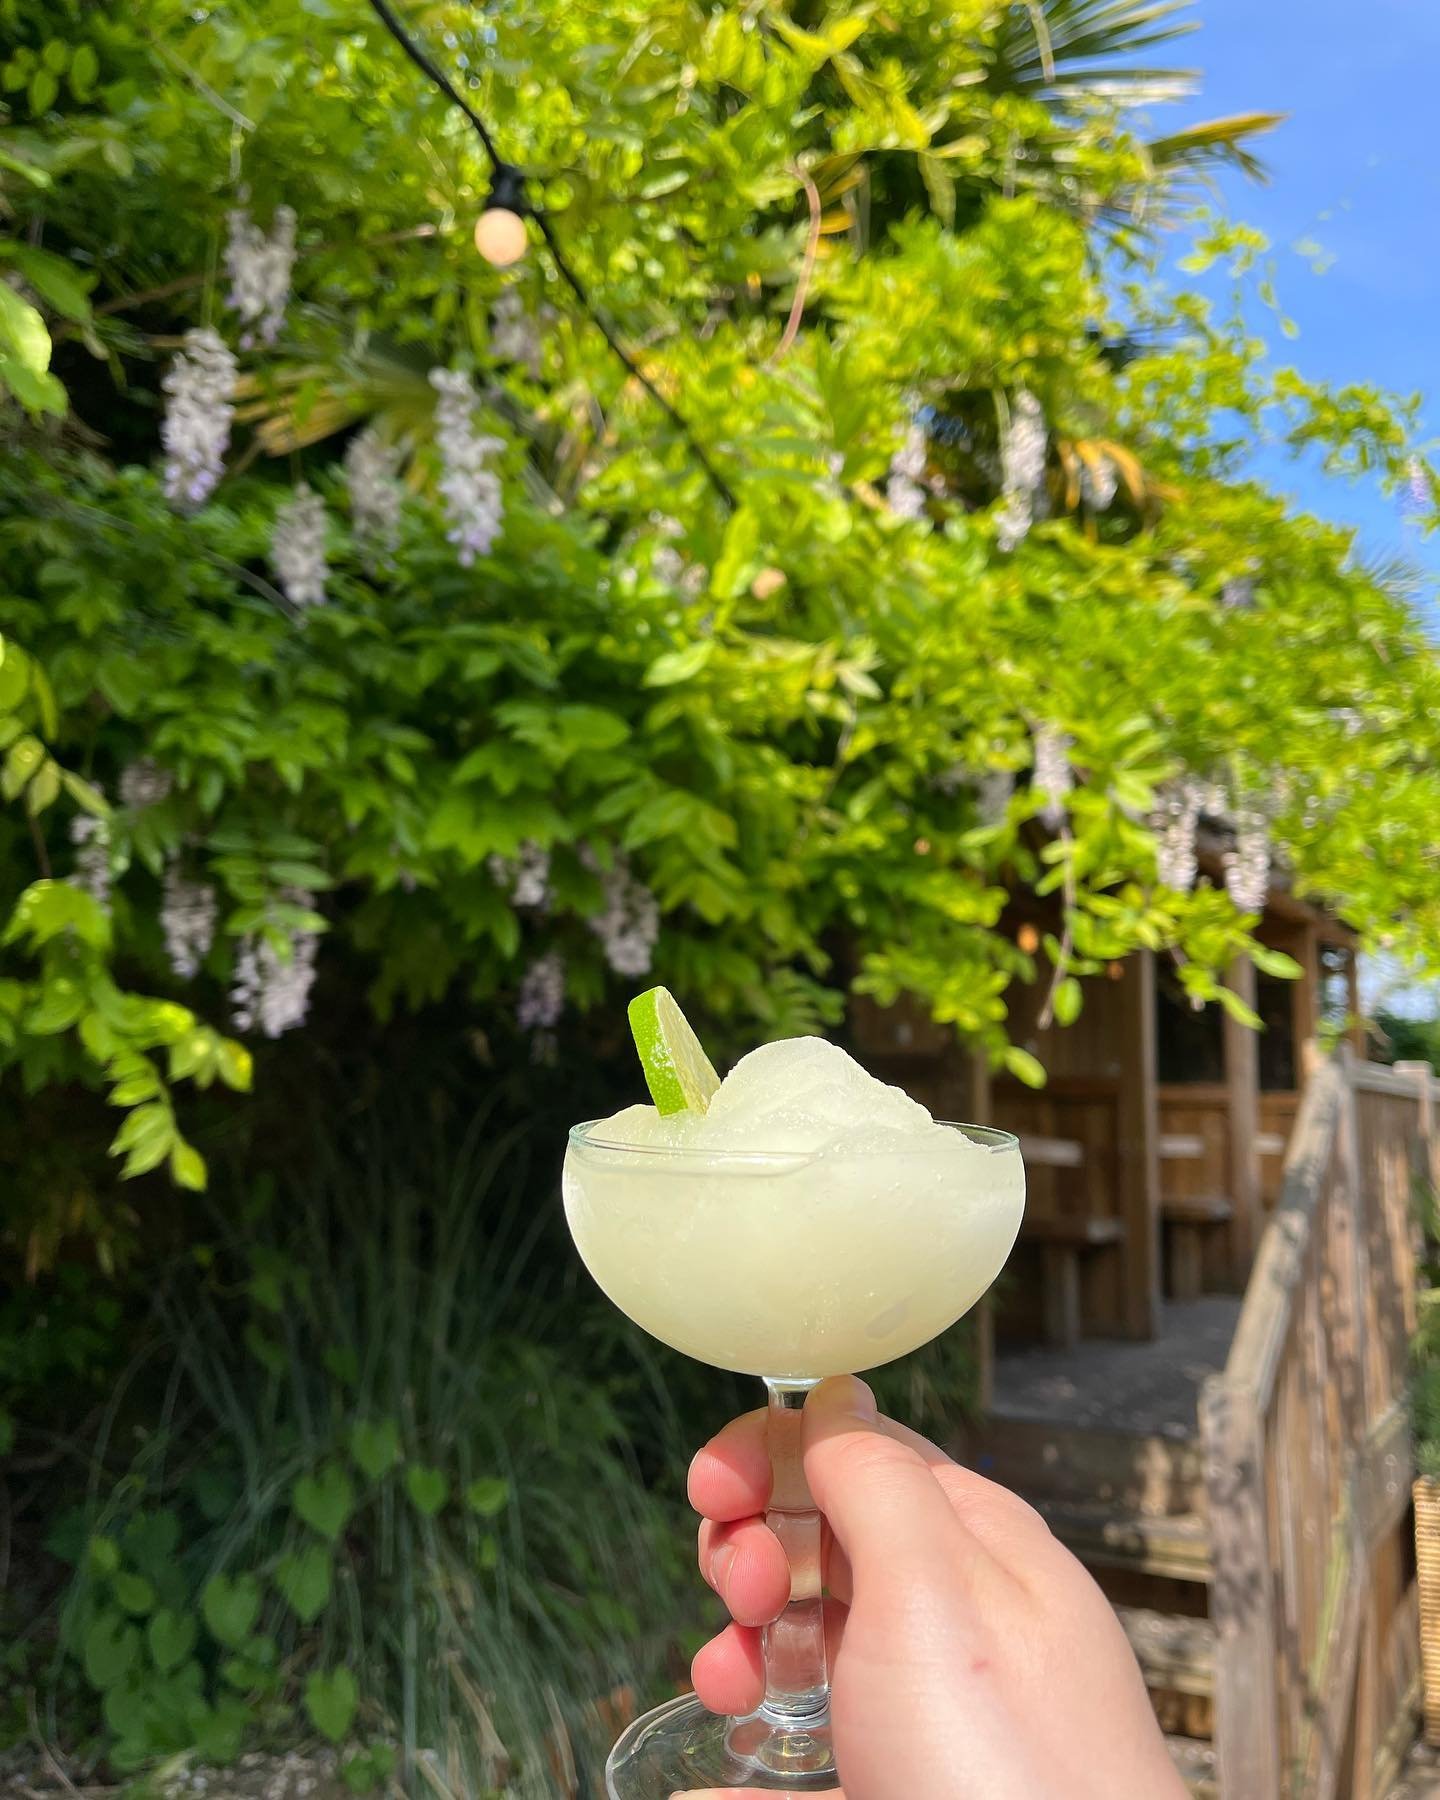 Frozen Margs are making a triumphant return!! The Watsons fan favourite will be available from tonight&hellip; what better way to start your weekend? 😜🍸 #cocktail #margarita #eastdulwich